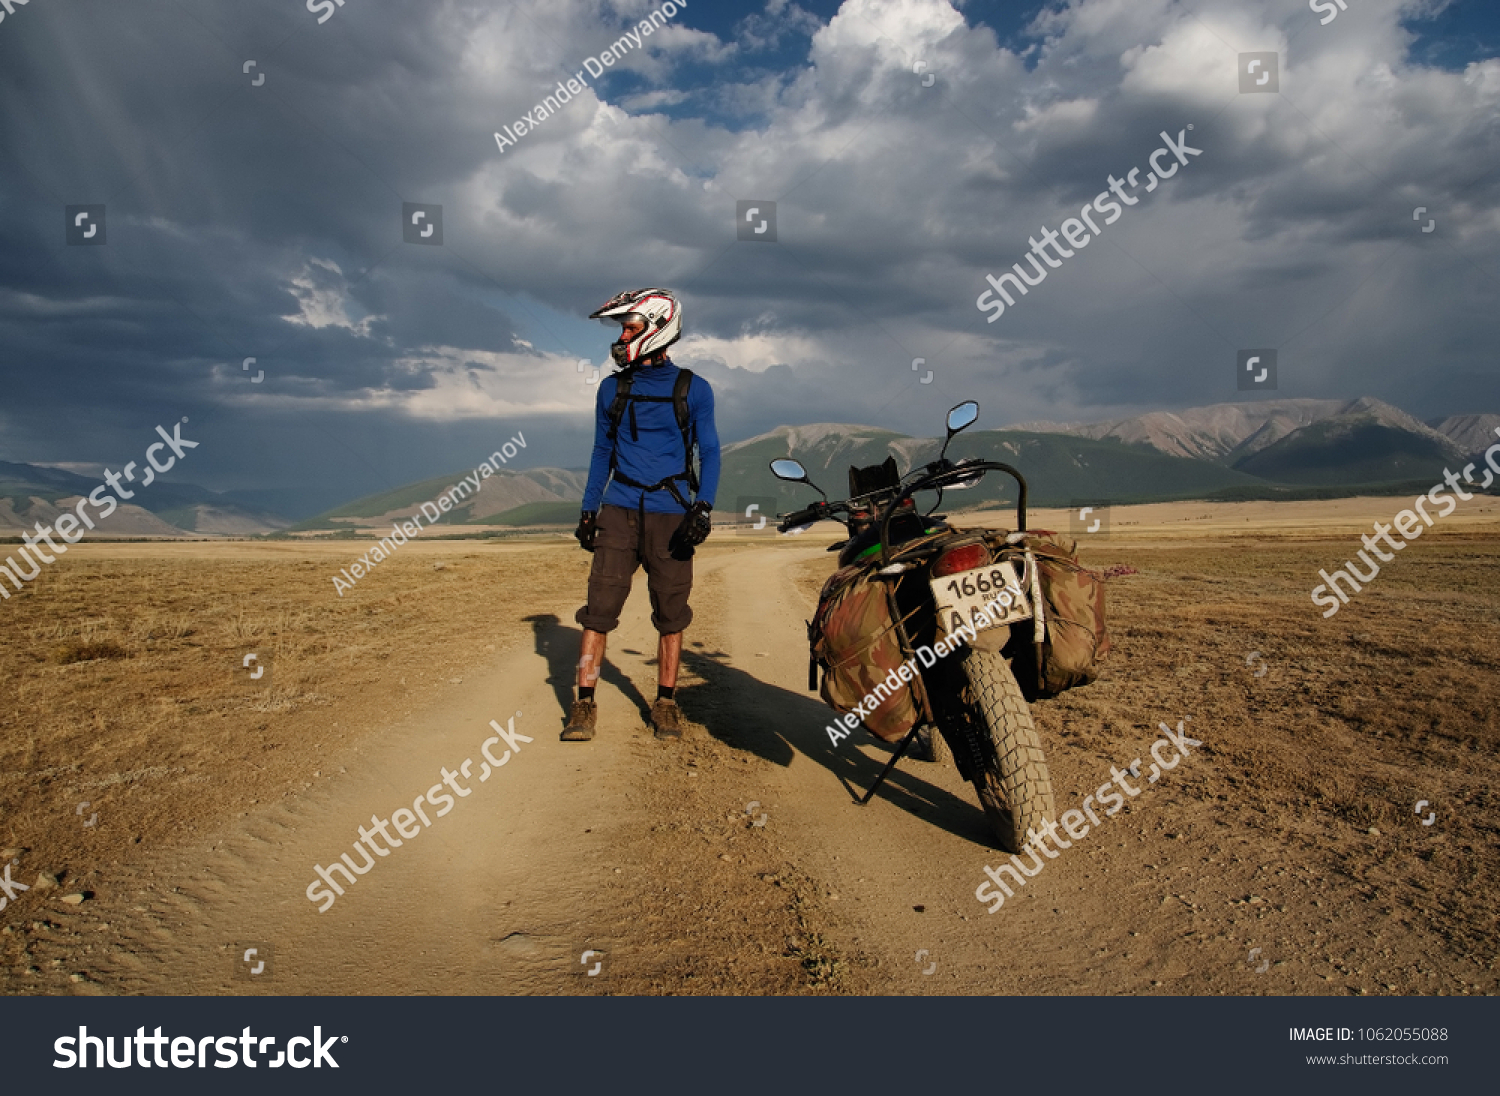 Motorcycle traveler man in helmet with suitcases standing on extreme rocky road in a mountain valley in cloudy weather on the background of endless steppe #1062055088